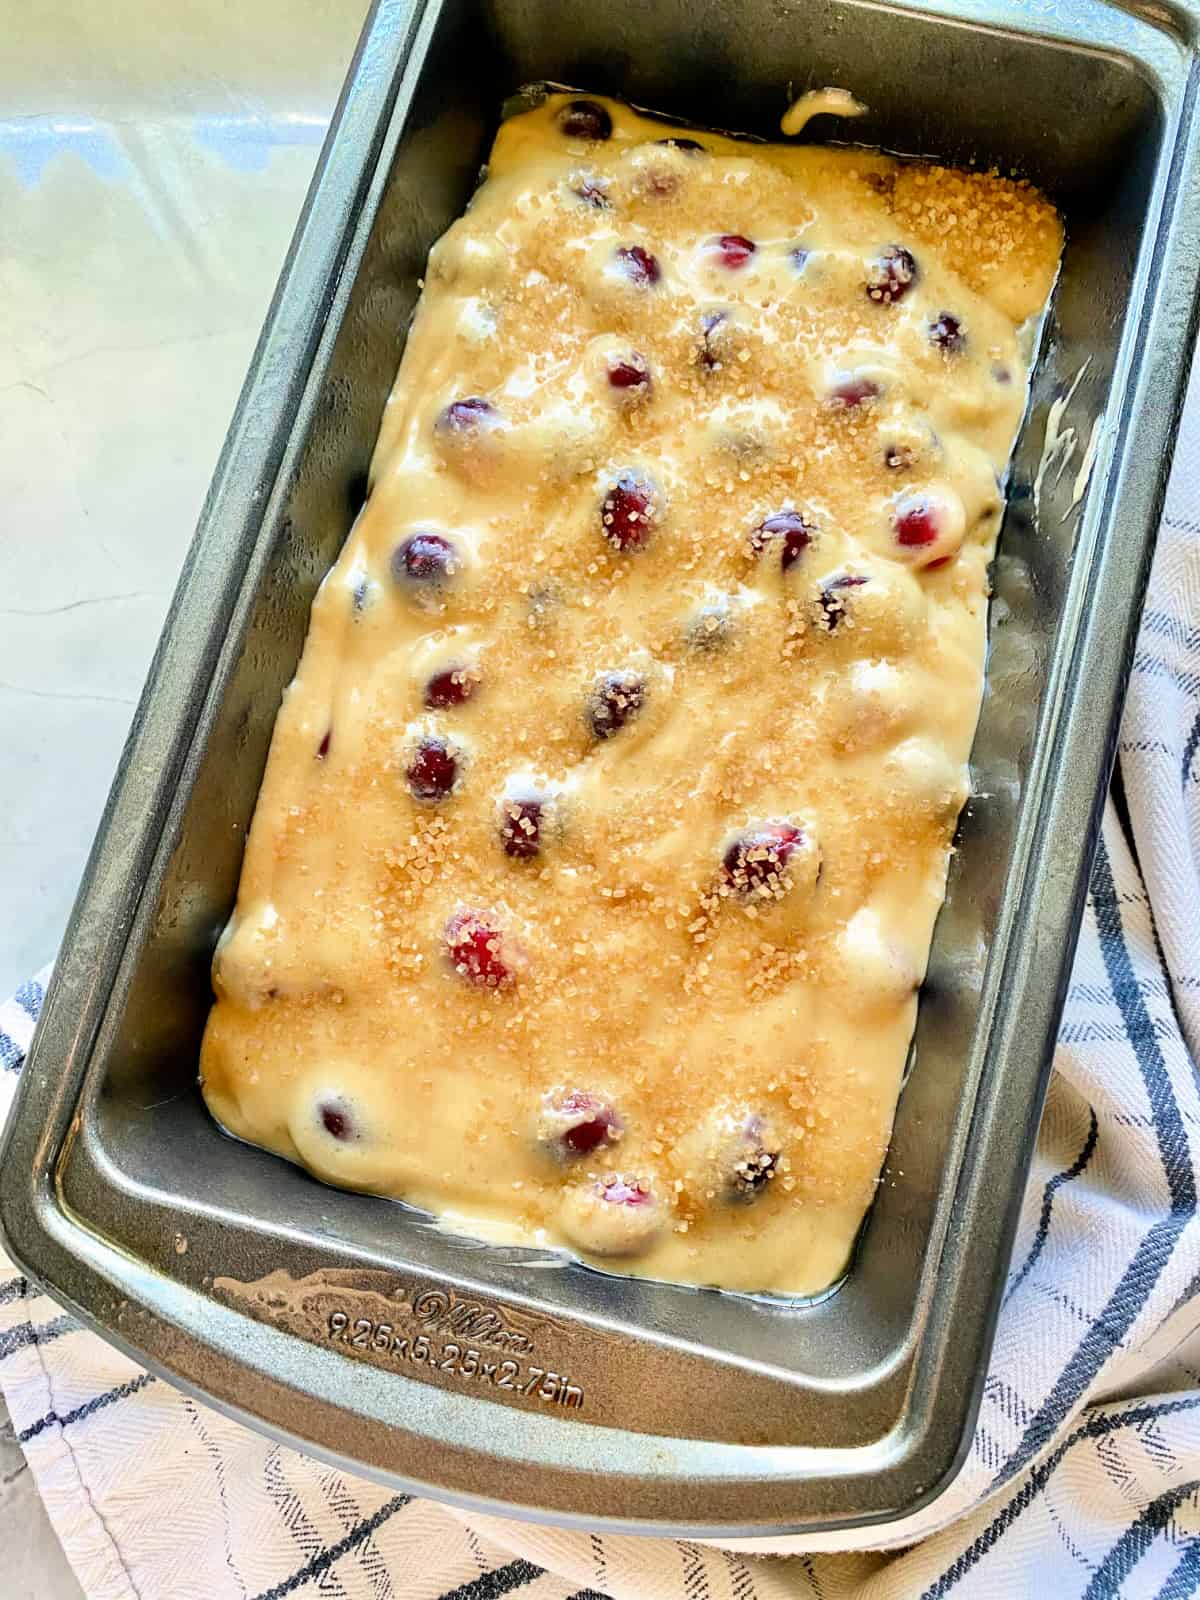 Top view of a metal loaf pan with batter and cranberries on top.